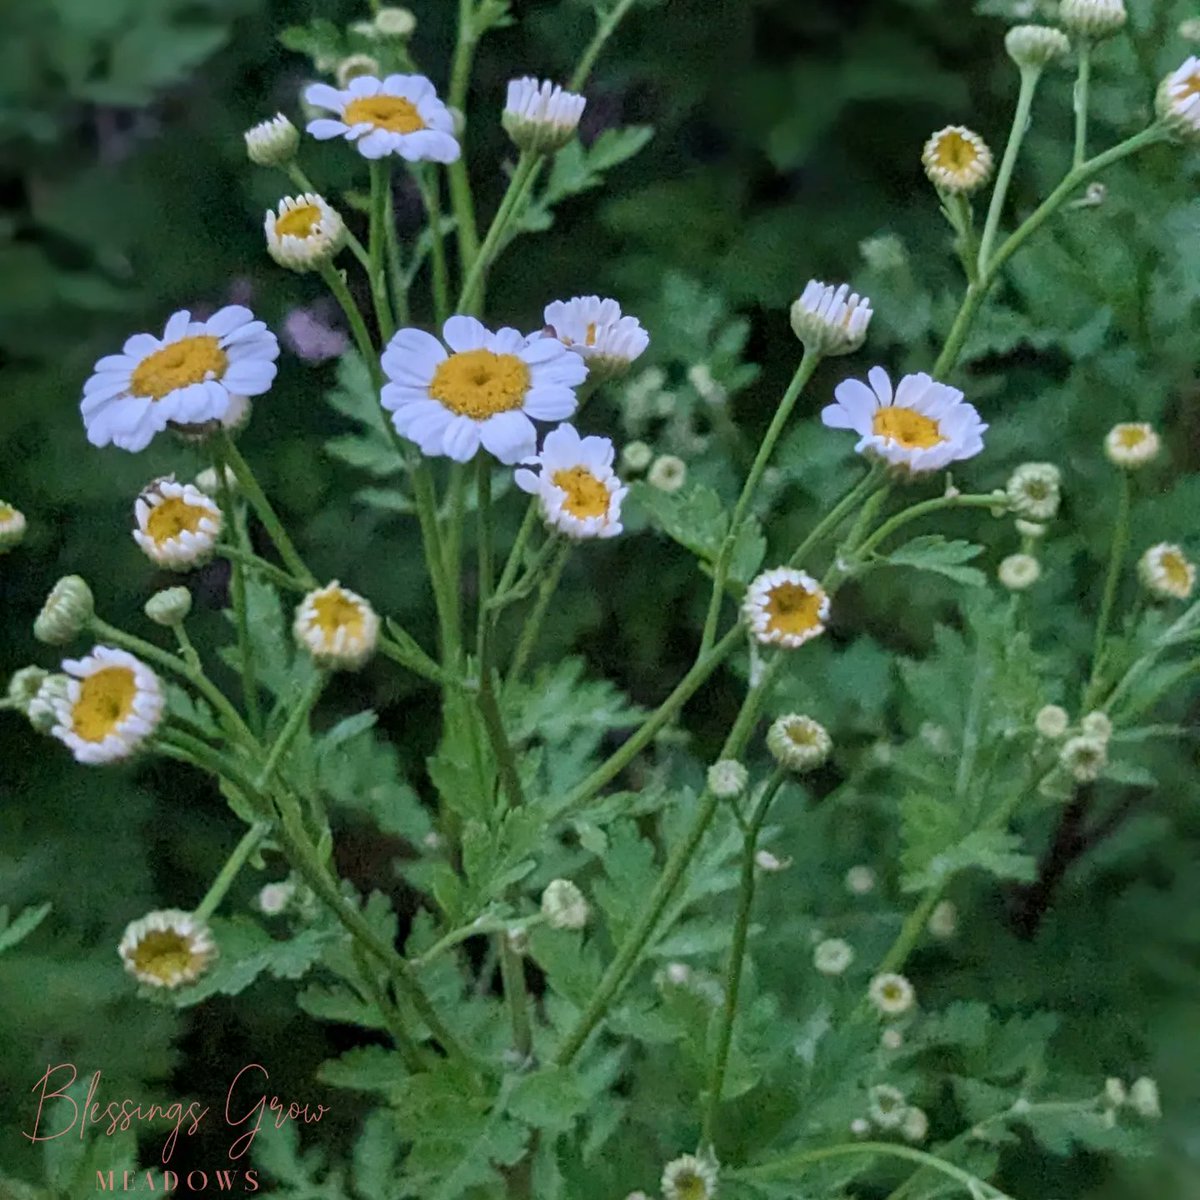 Have you placed your order for Mother's Day yet? We only have a few slots left! Our feverfew patch is blooming just in time! 💐
#feverfew #mothersday #mothersdayflowers #nlessingsgrow #thabkfulfortheharvest #growingwithpurpose #ASCFG #grownnotflown